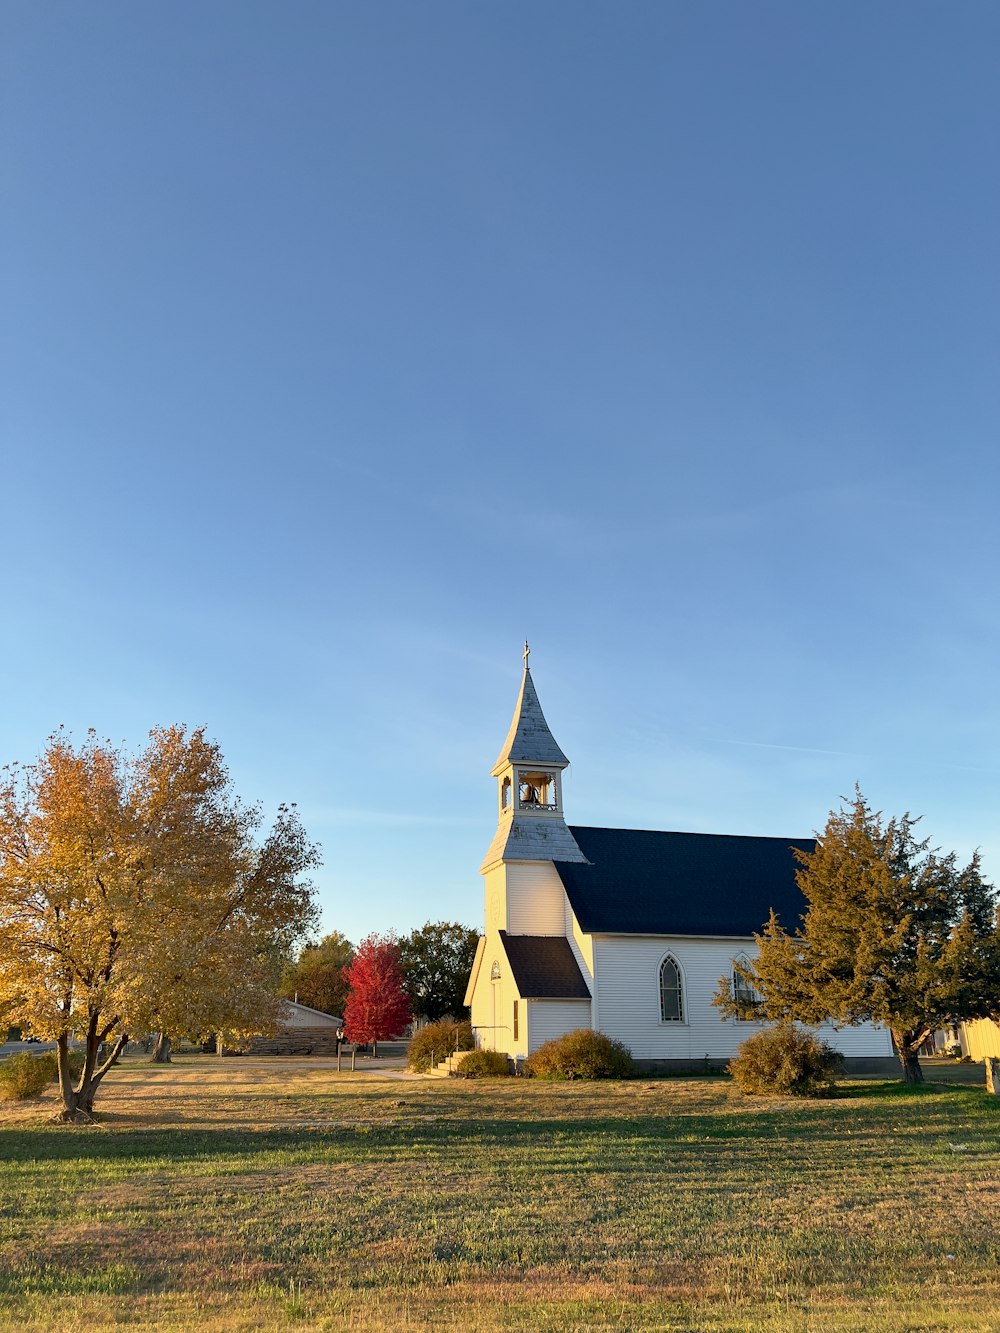 a white church with a black roof and steeple